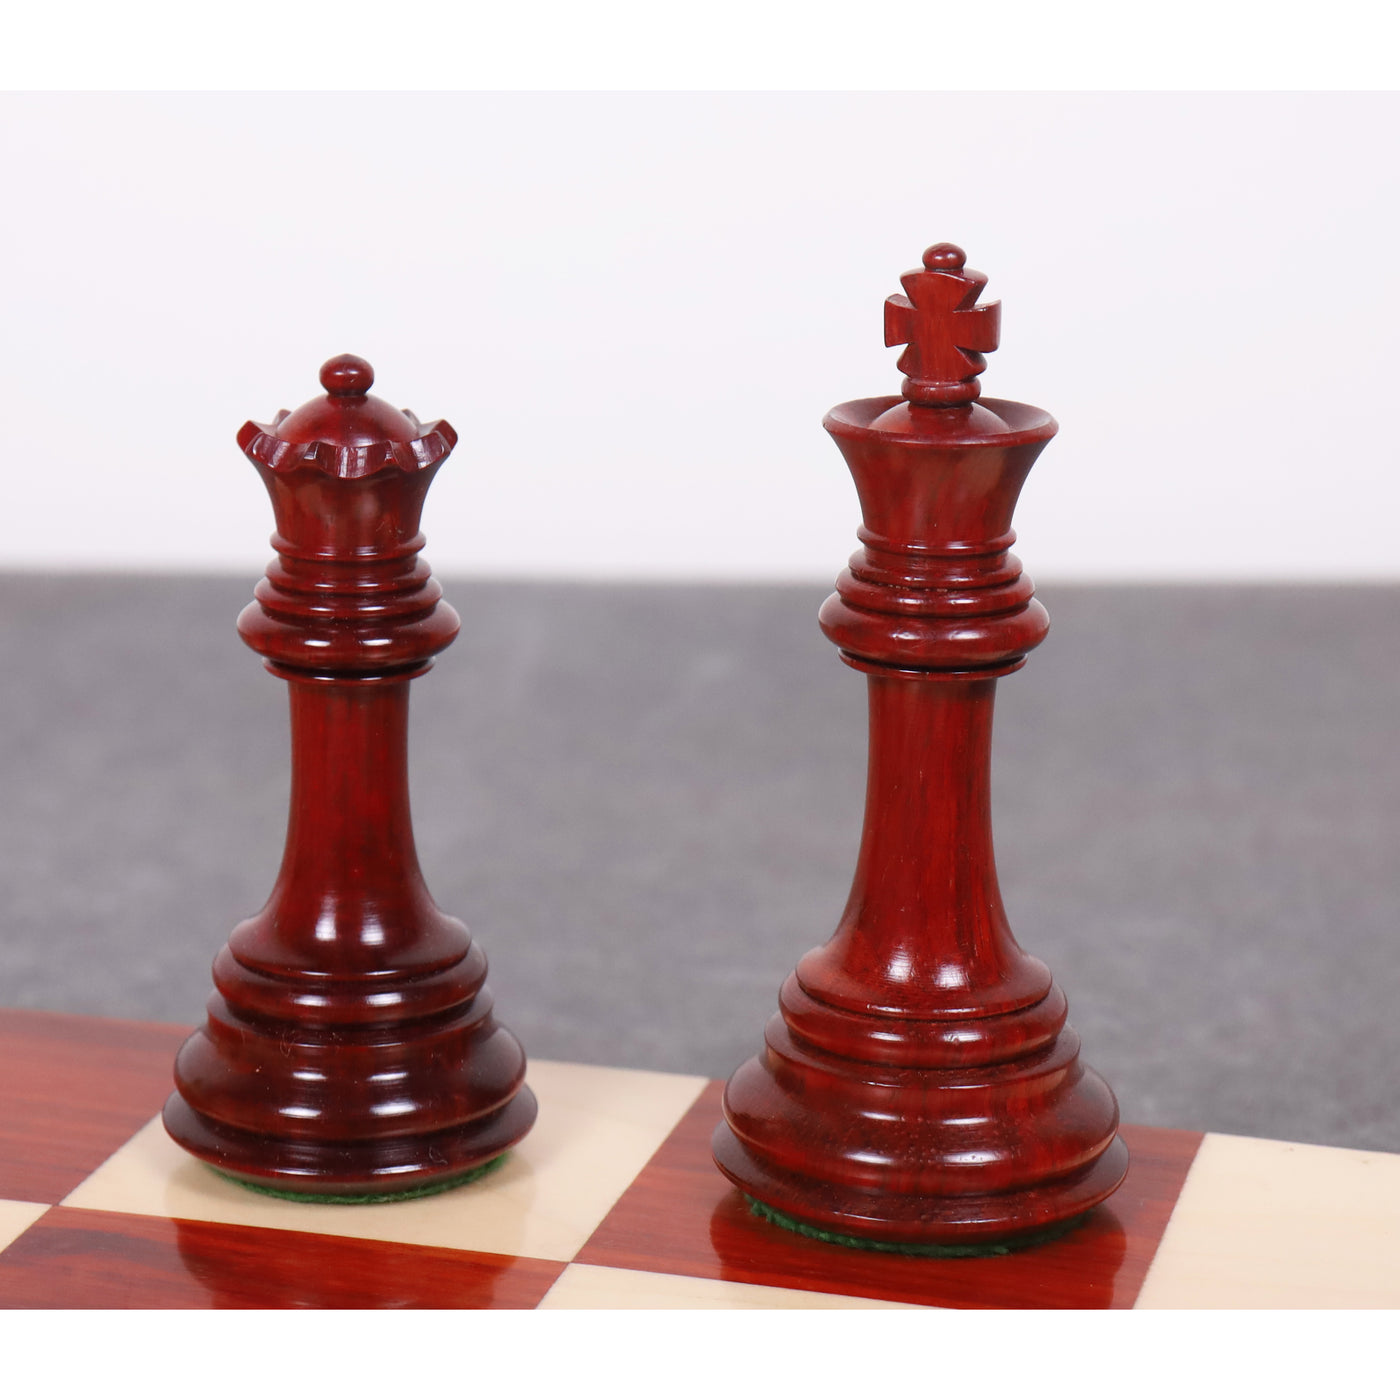 3.9" New Columbian Staunton Chess Pieces Only Set -Bud Rosewood- Double Weighted